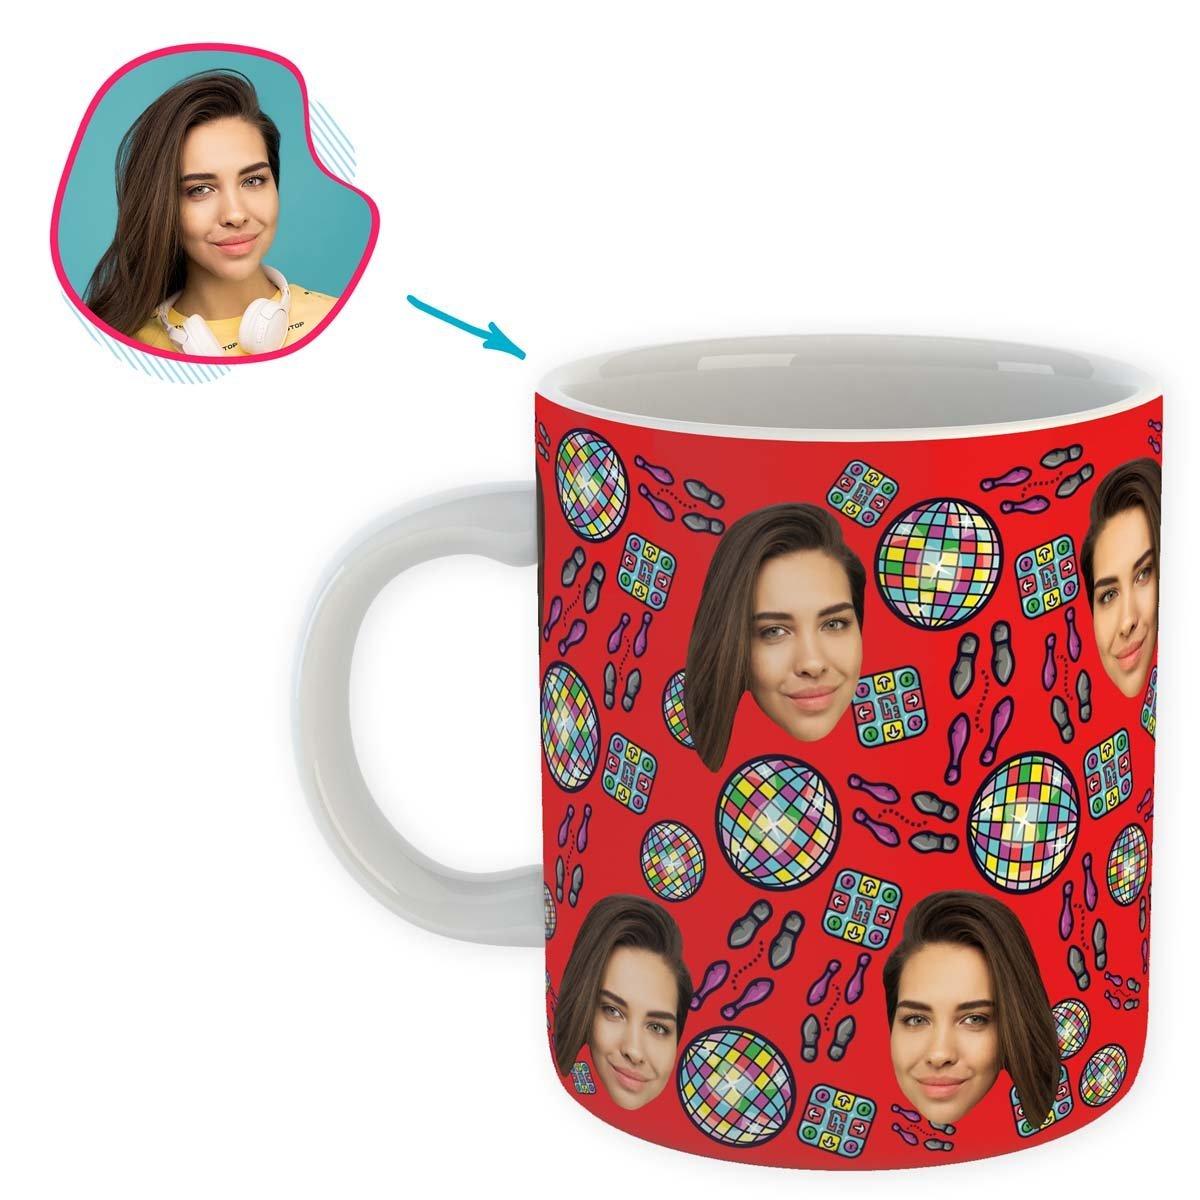 red Dancing mug personalized with photo of face printed on it